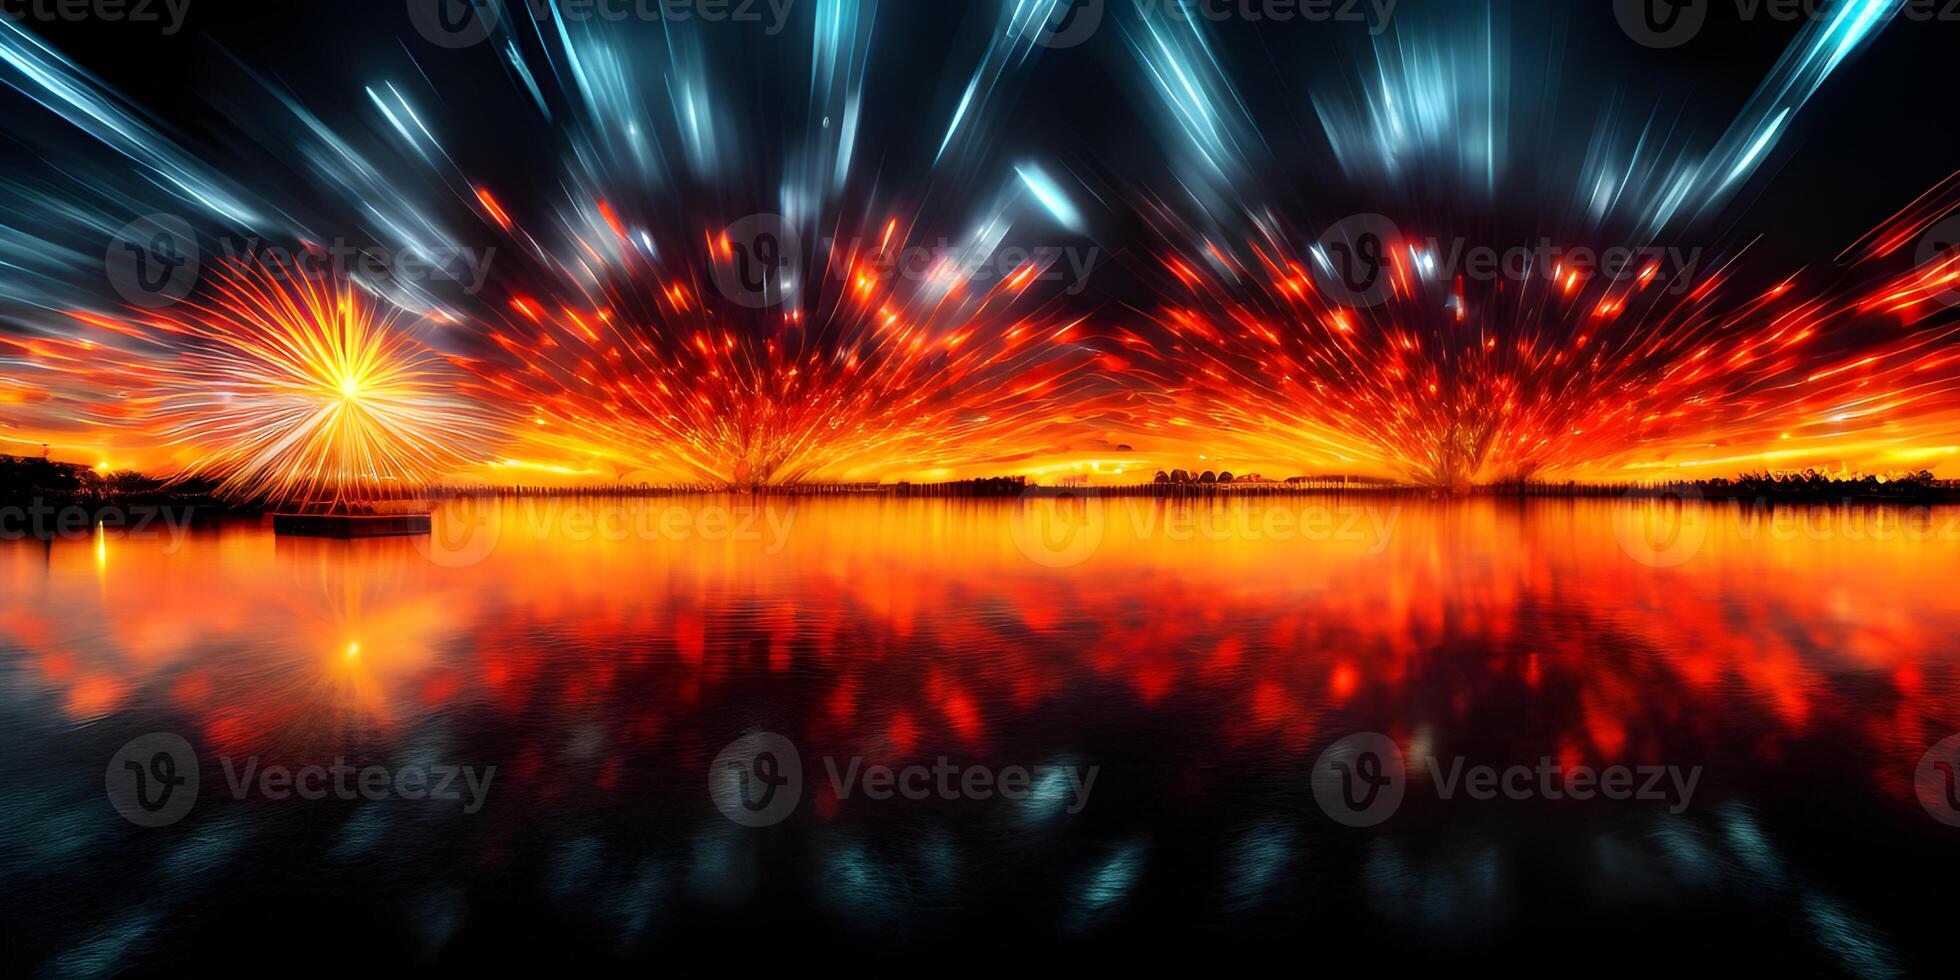 Colorful fireworks display with vibrant reflections on water at night nature background, photo